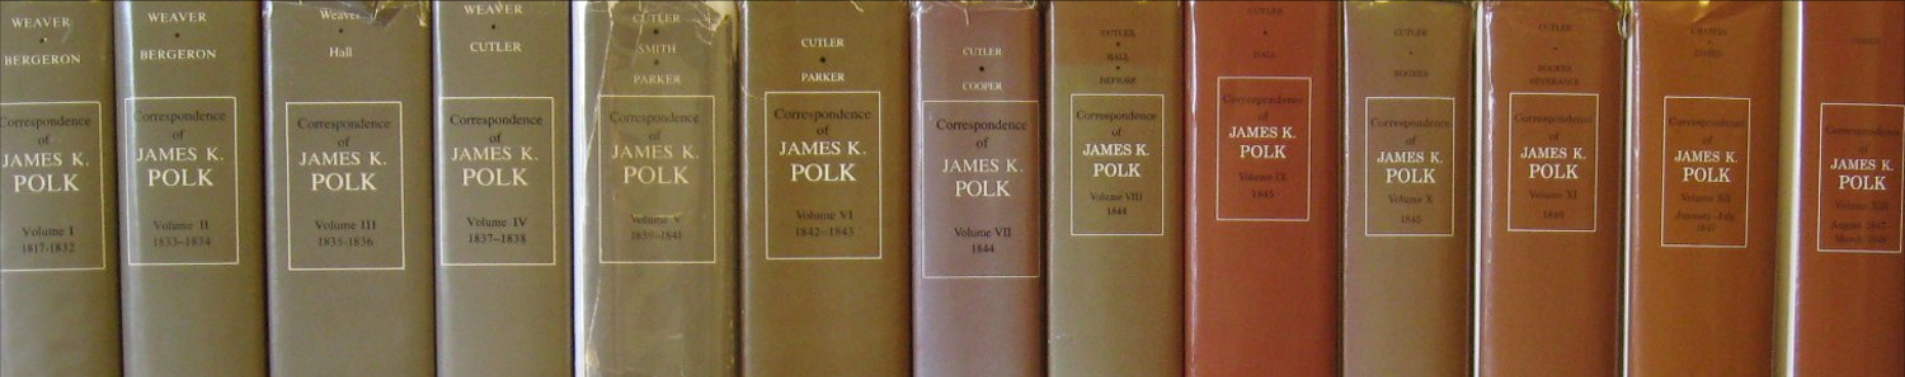 A row of books with James K. Polk on the spines